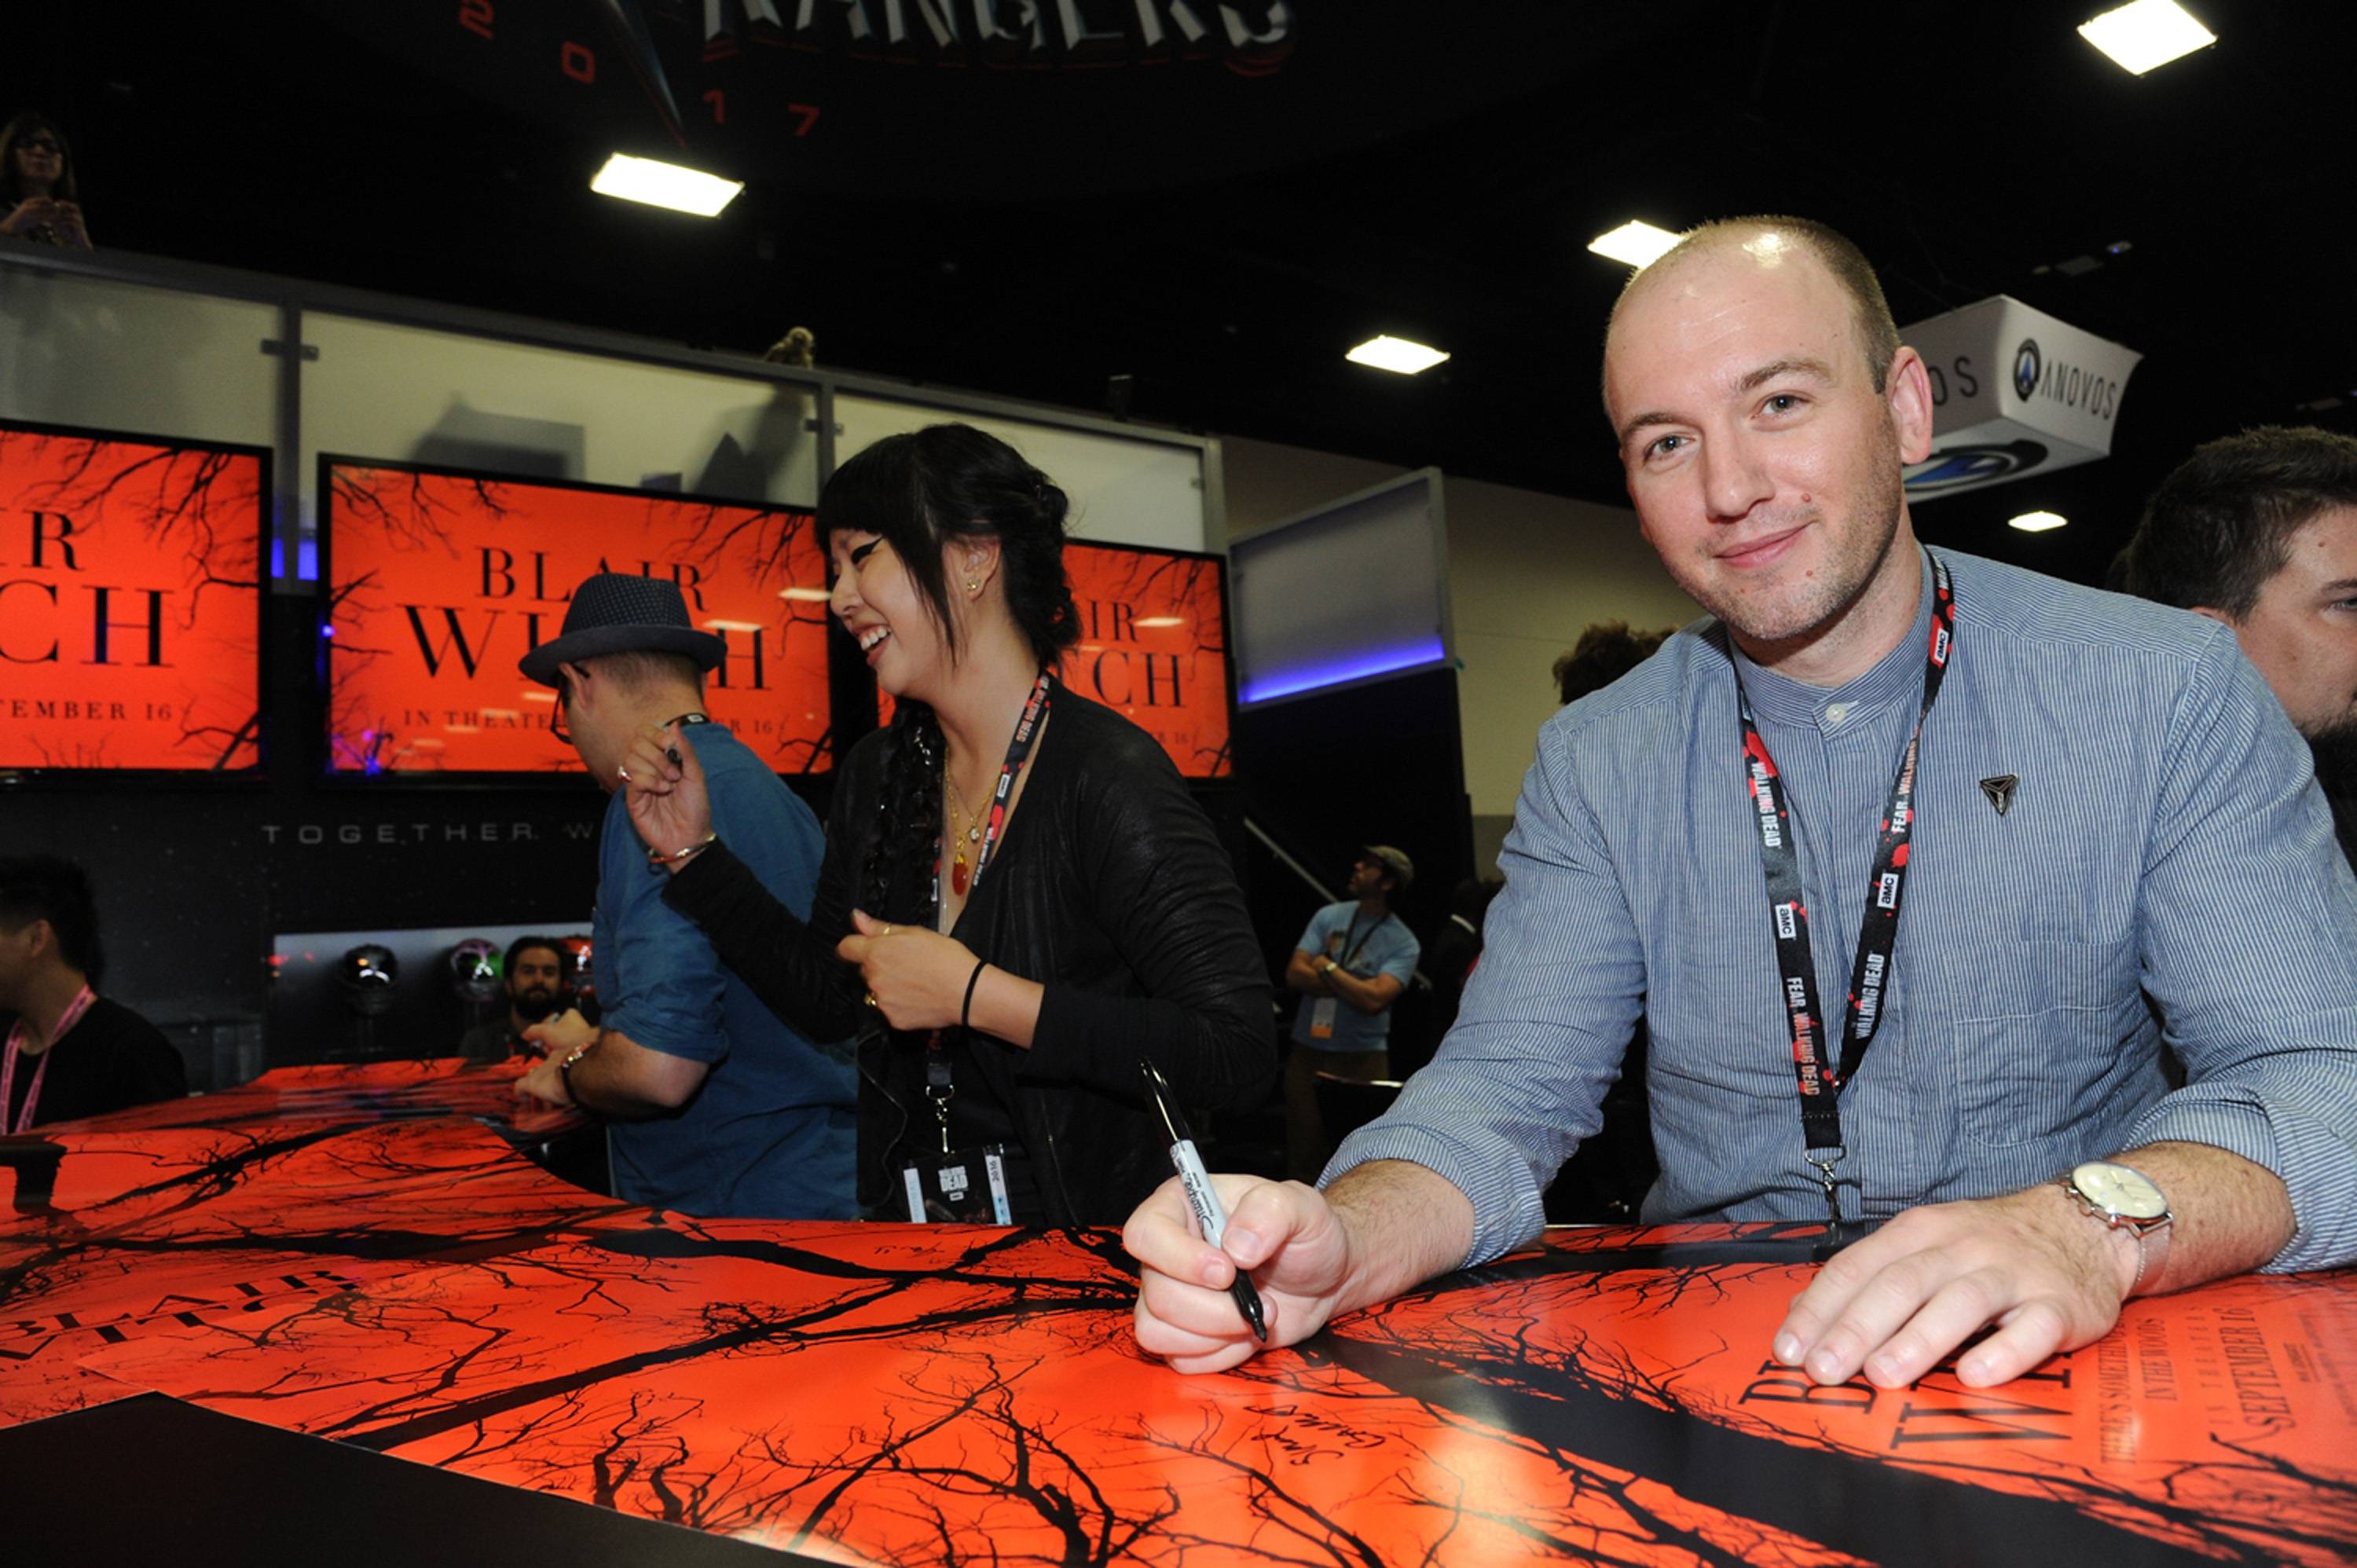 Screenwriter Simon Barrett seen at the Lionsgate Booth to sign autographs for 'Blair Witch' and meet fans at San Diego Comic-Con at 2016 Comic-Con on Saturday, July 23, 2016, in San Diego, CA. (Photo by Richard Shotwell/Invision for Lionsgate/AP Images)